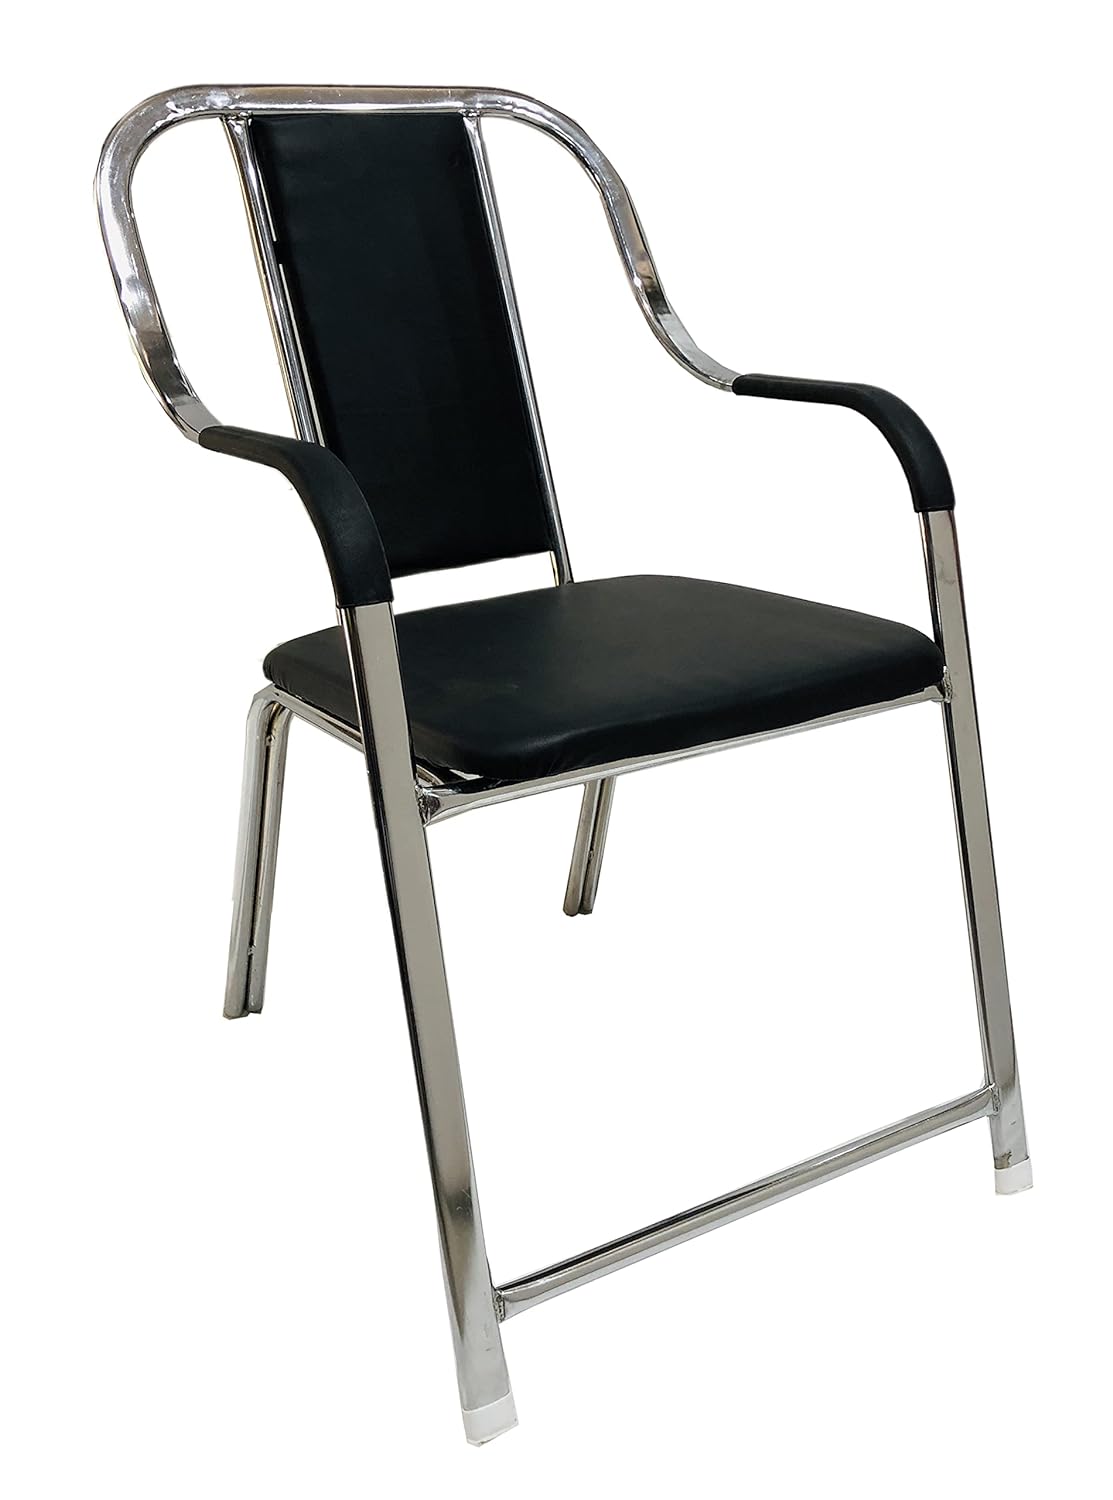 Bowzar Steel Chair Home Office with Cushion seat Back,Durable Chrome Steel Frame